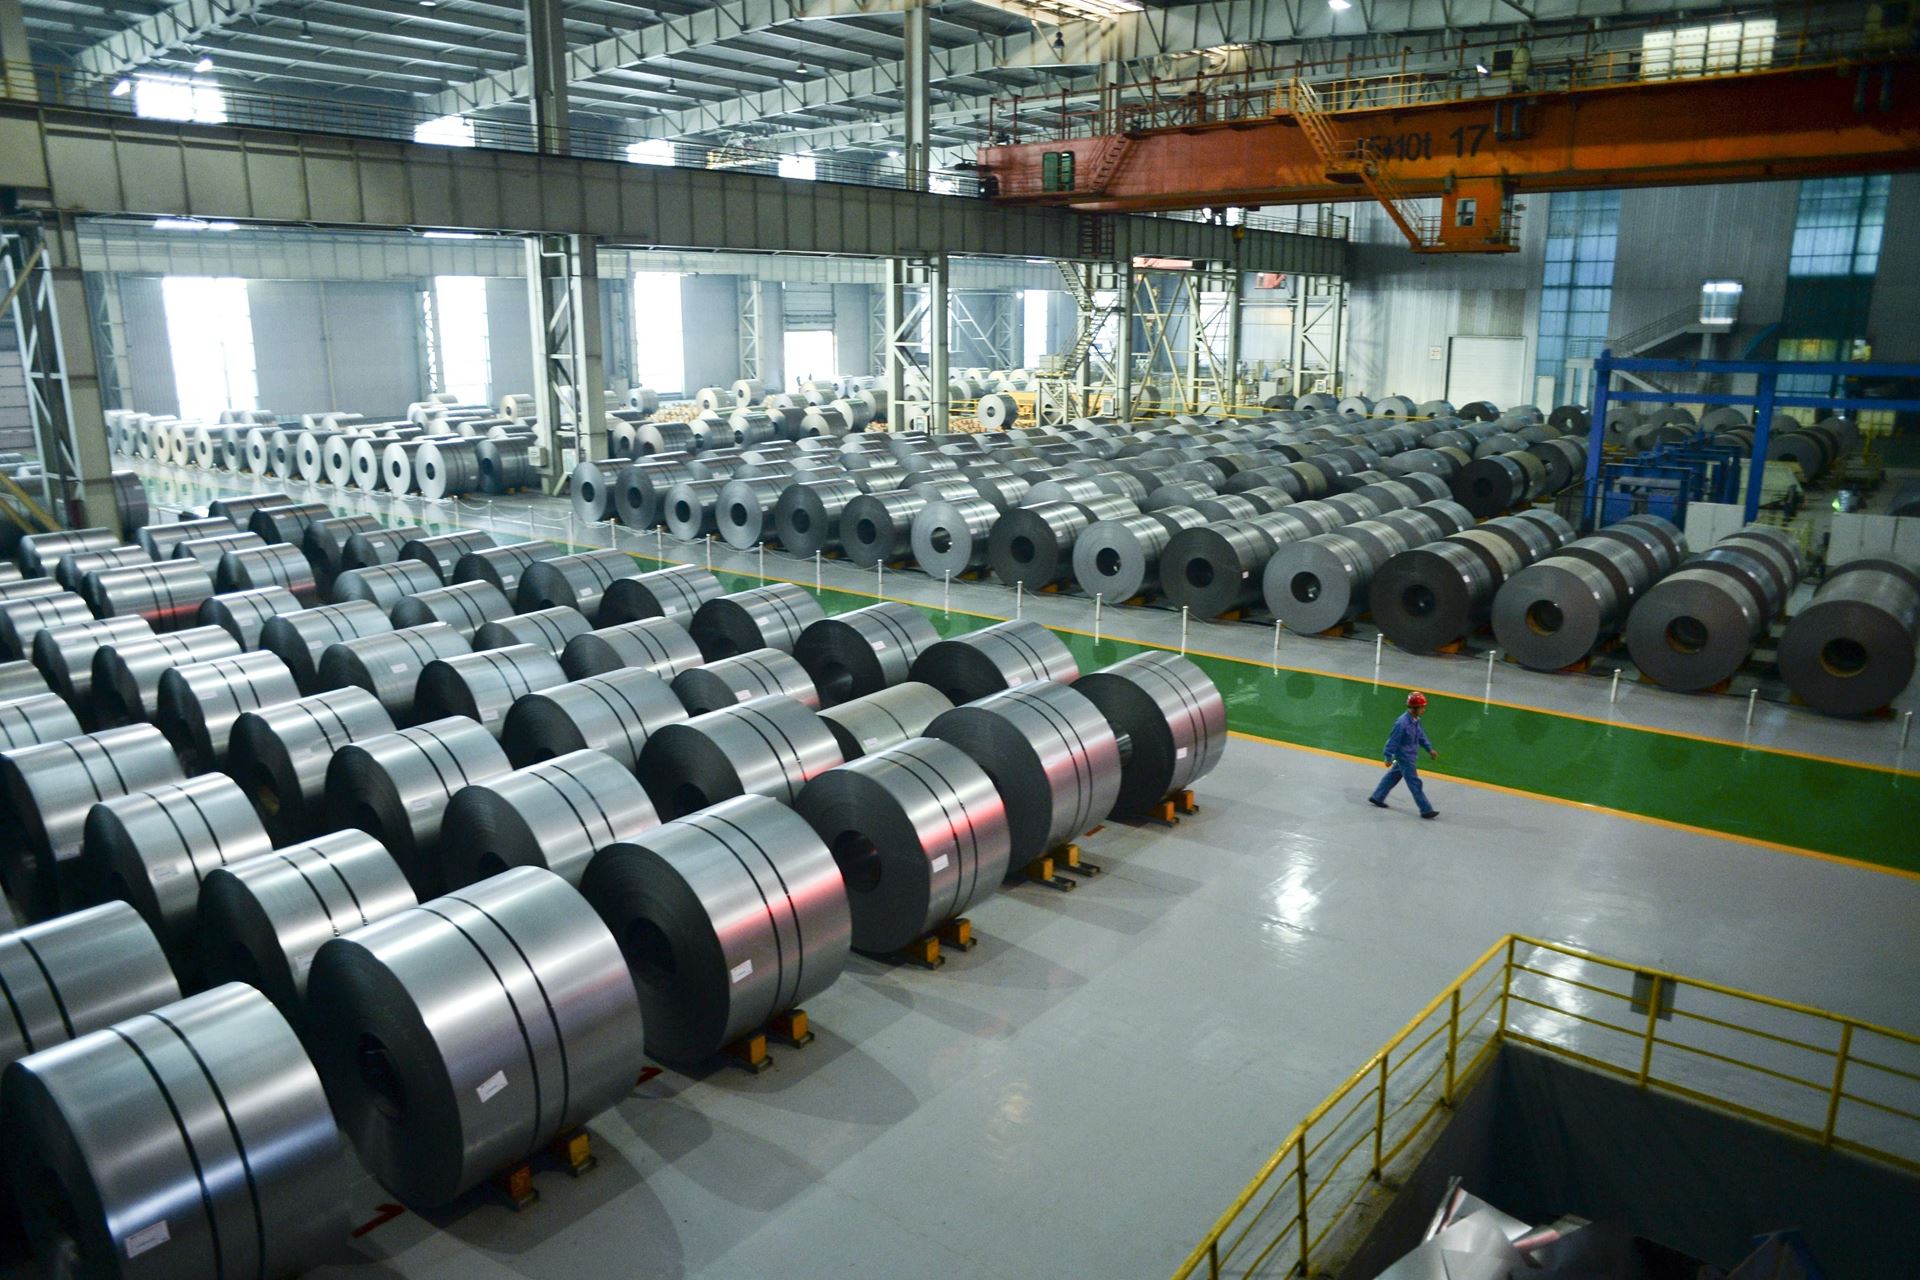 China Steel Corp raises prices for August sales